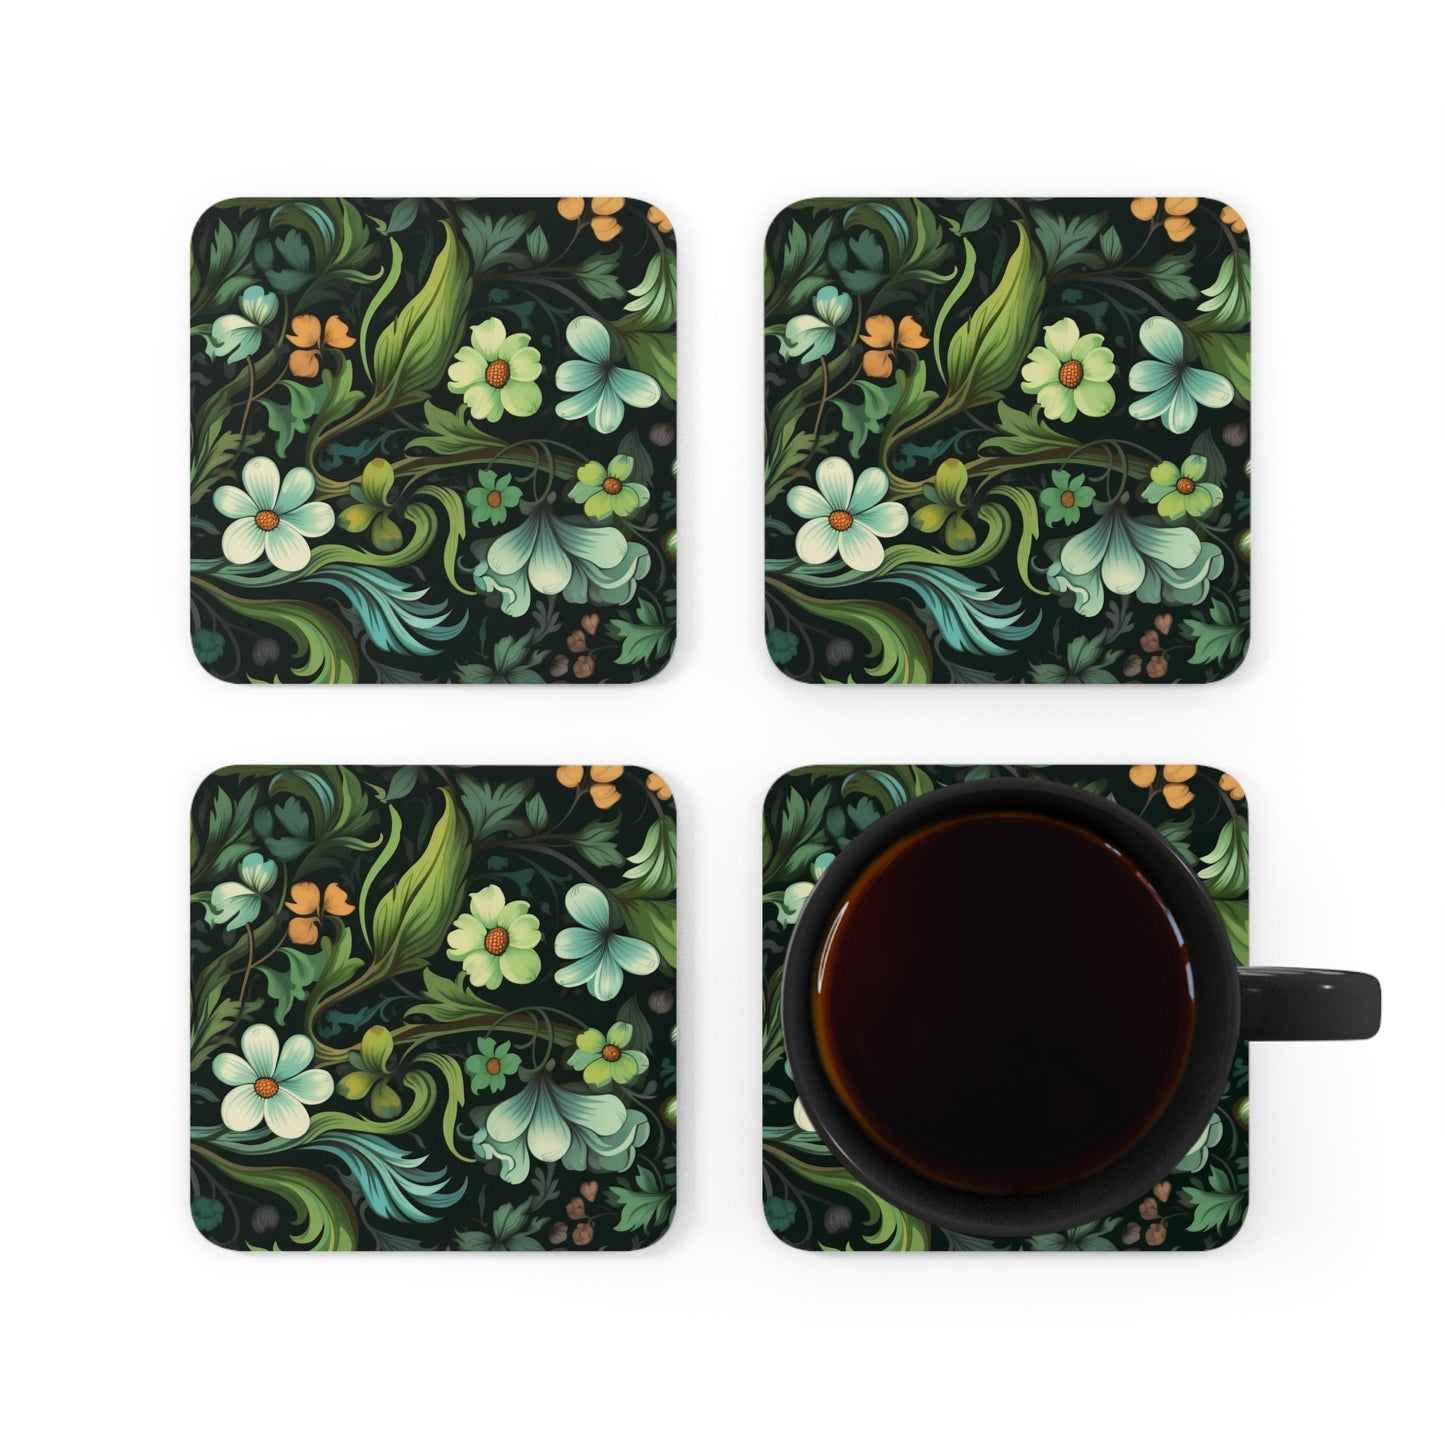 Enchanted Garden Coasters Set of 4, Green and Teal Floral Coffee Cup Mats, Cottagecore Coffee Table Decor, Housewarming Gift, Gift for Her